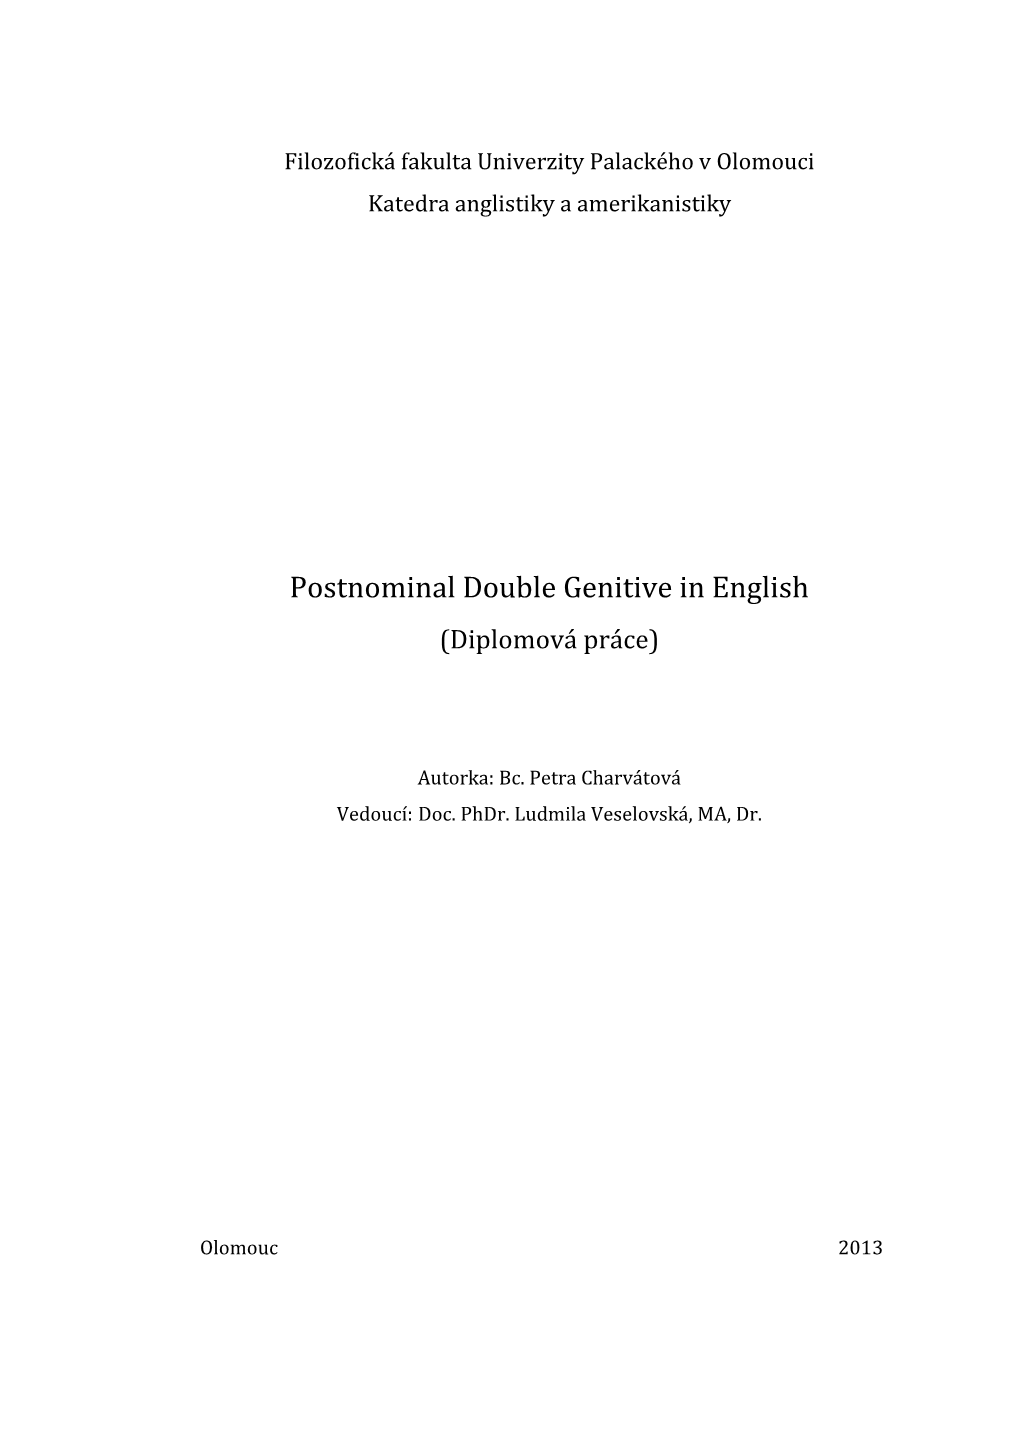 Postnominal/Double Genitive in English